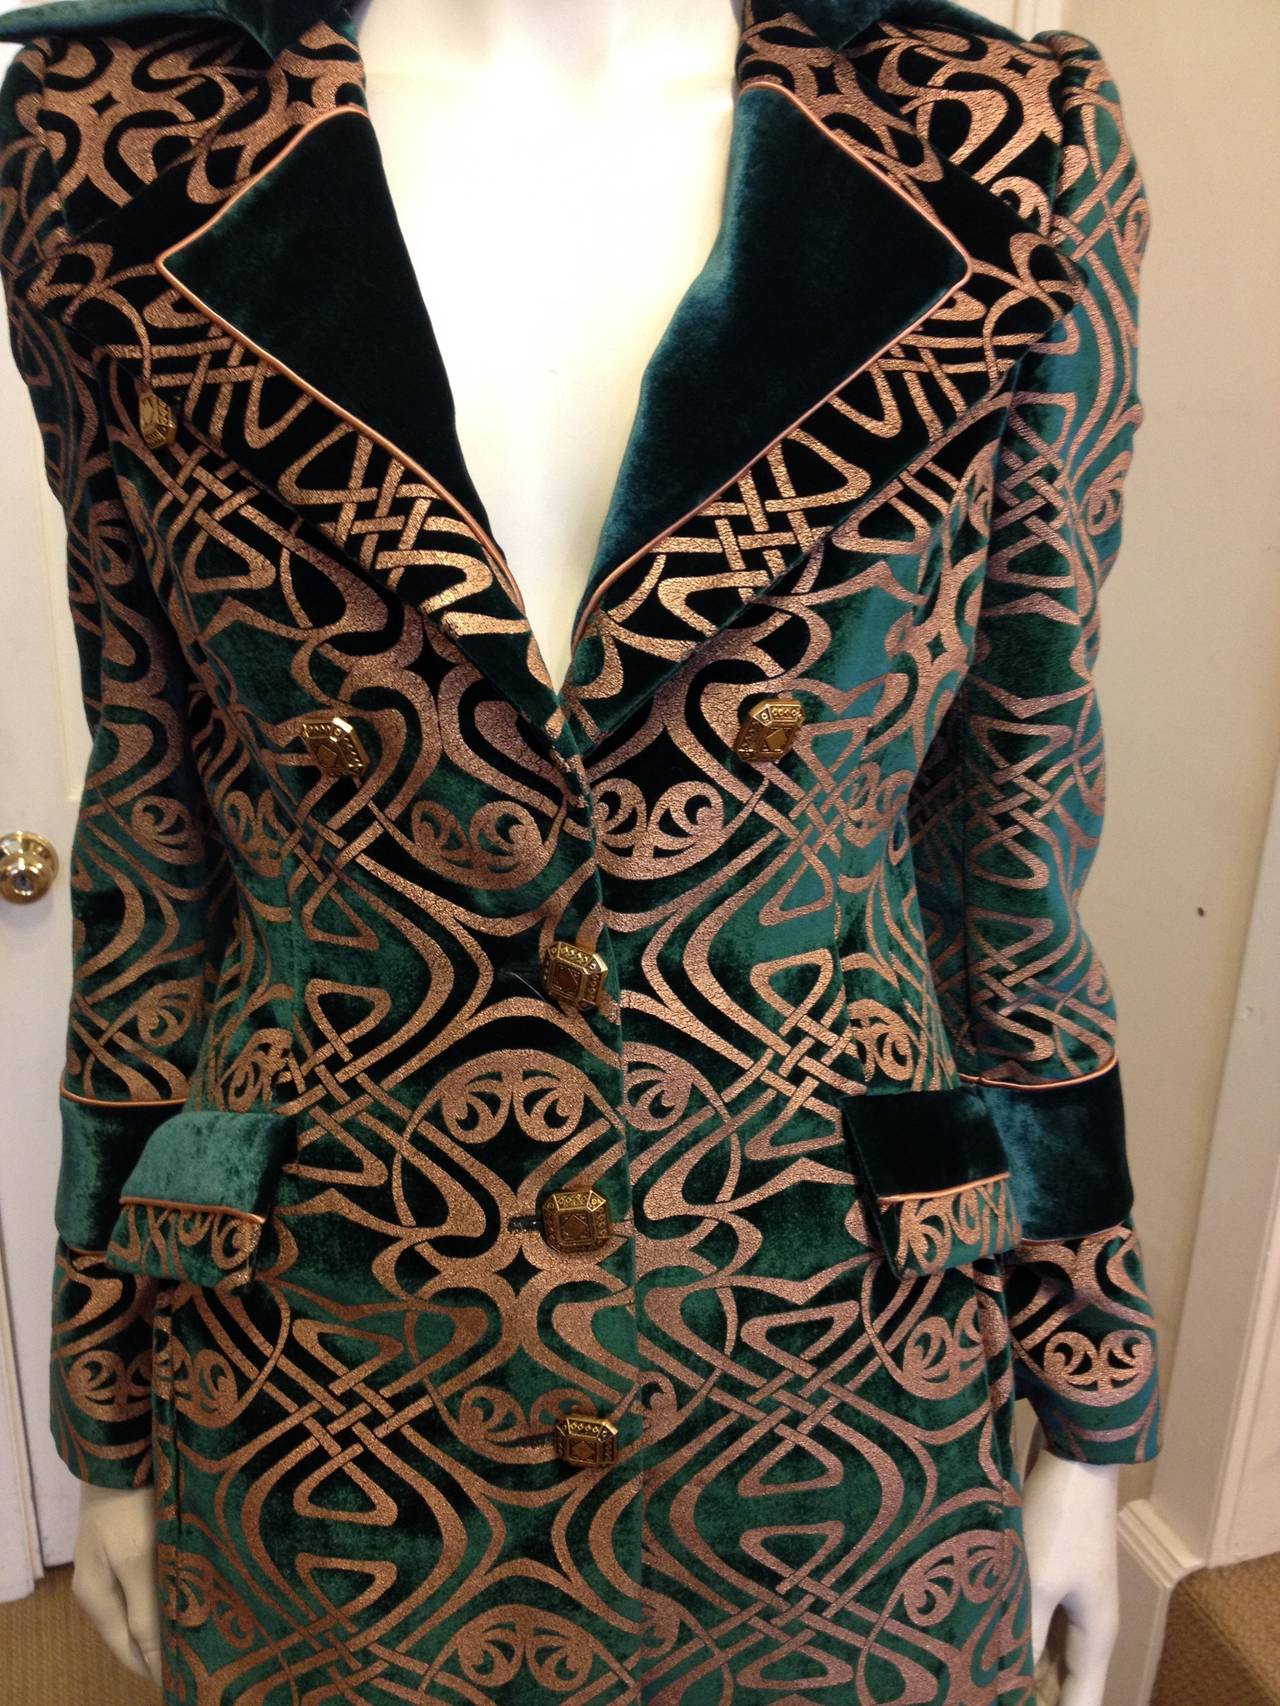 The art deco inspired pattern creates a gorgeous graphic on this amazing coat. This coat is perfect for an evening with your friends or for when you're going out to a cocktail party but want to cover your dress with something exciting. Cast metal